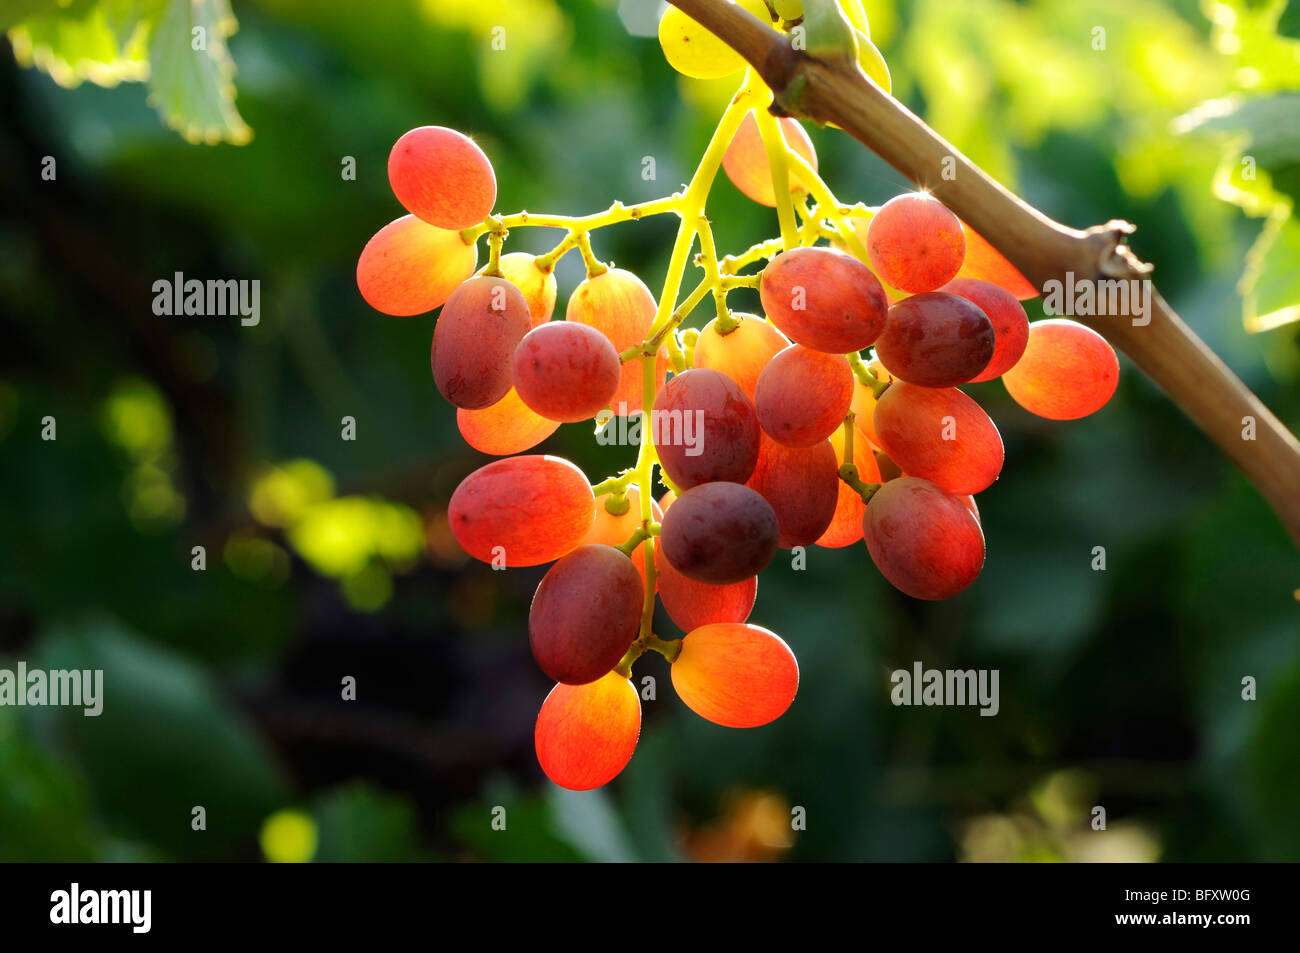 Israel, Negev, Lachish Region, Vineyard, Close up of a cluster of ripe grapes Stock Photo